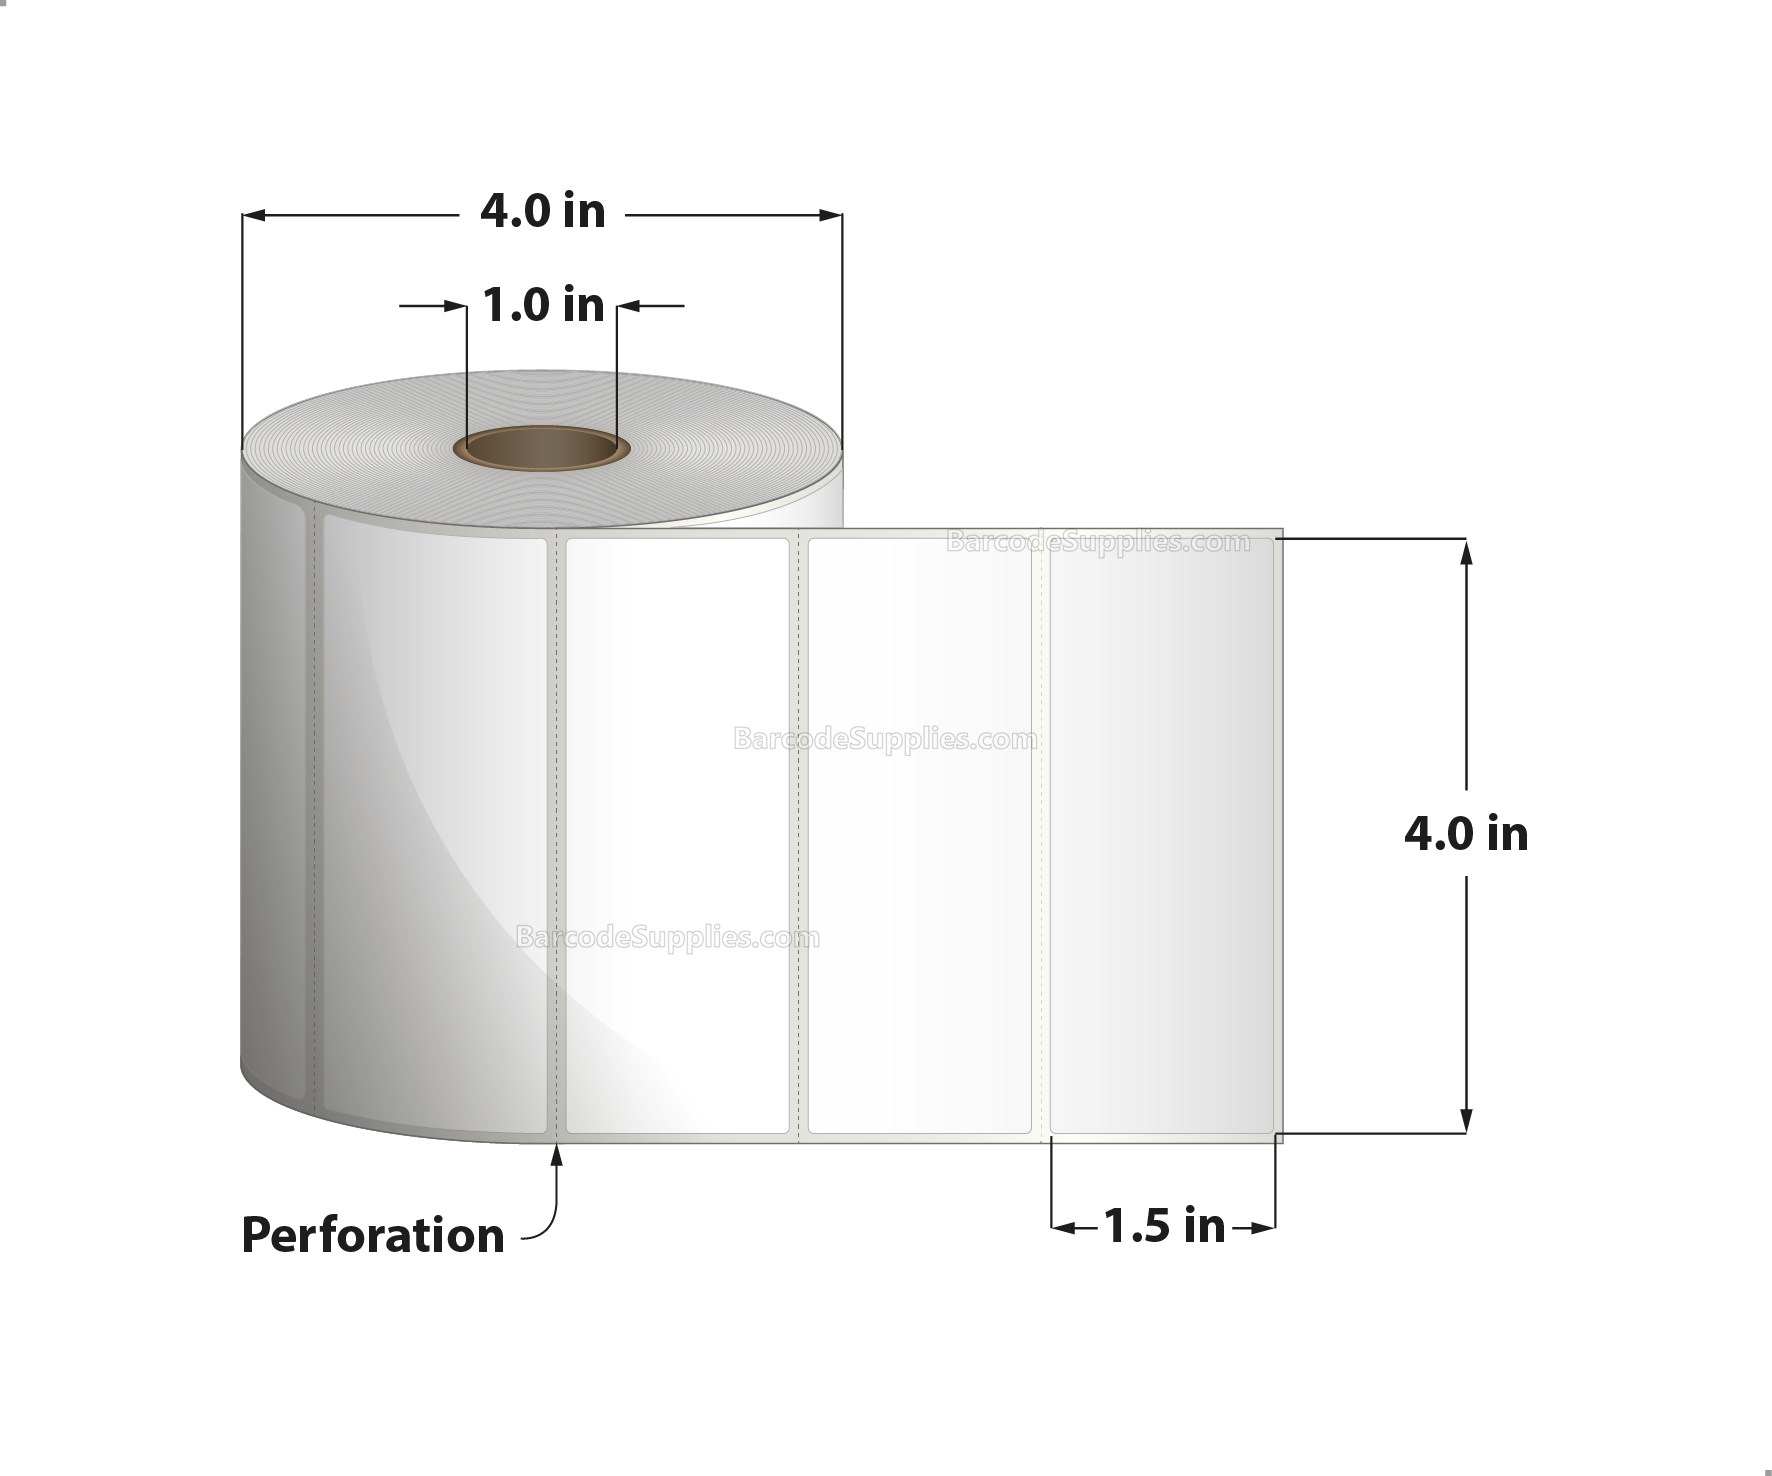 4 x 1.5 Thermal Transfer White Labels With Rubber Adhesive - Perforated - 960 Labels Per Roll - Carton Of 12 Rolls - 11520 Labels Total - MPN: RTT4-400150-1P